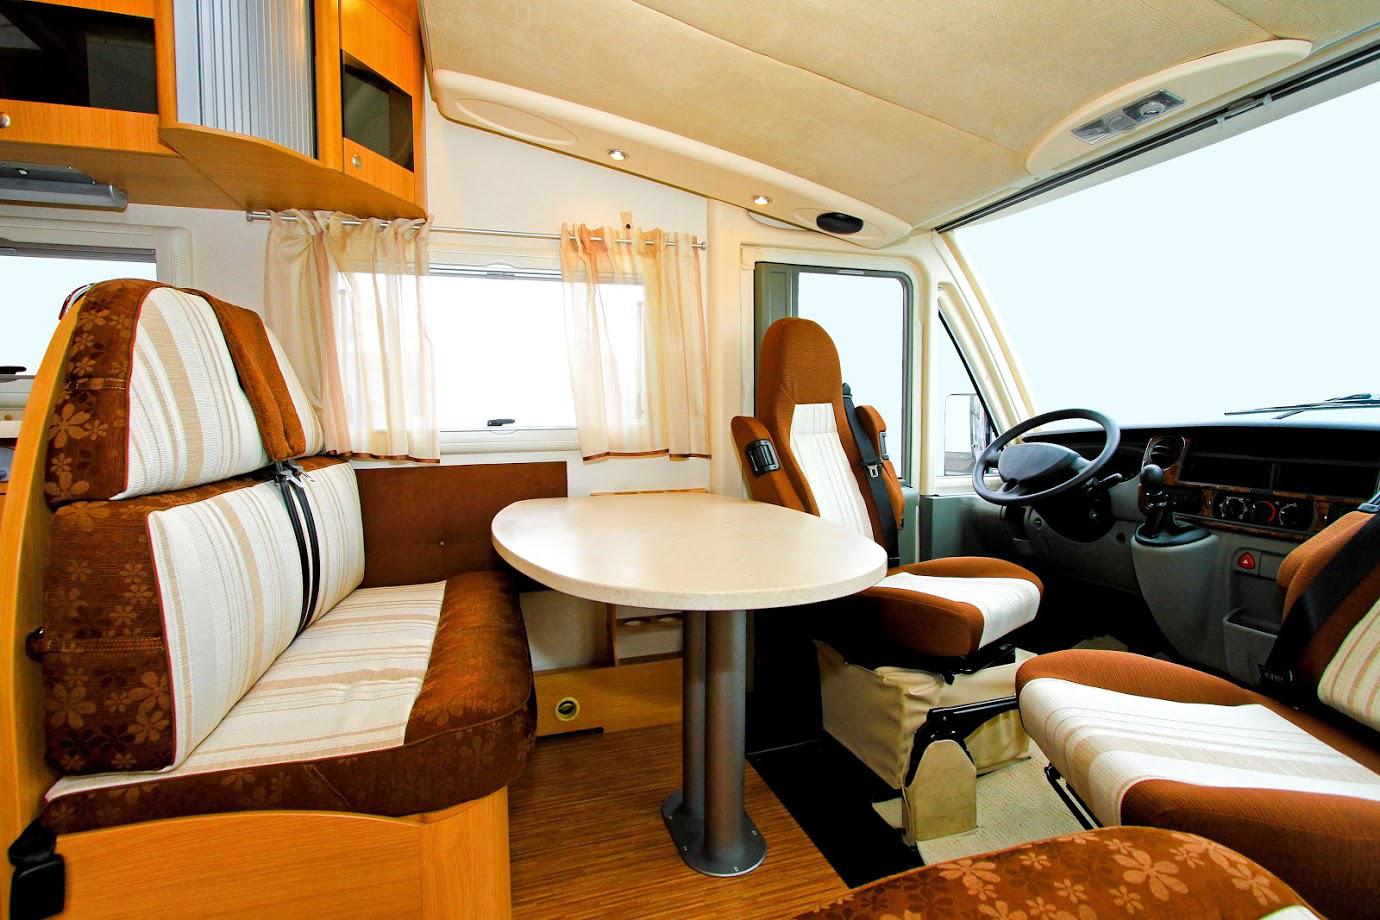 RV Ownership: What You Should Know About Common Window Issues